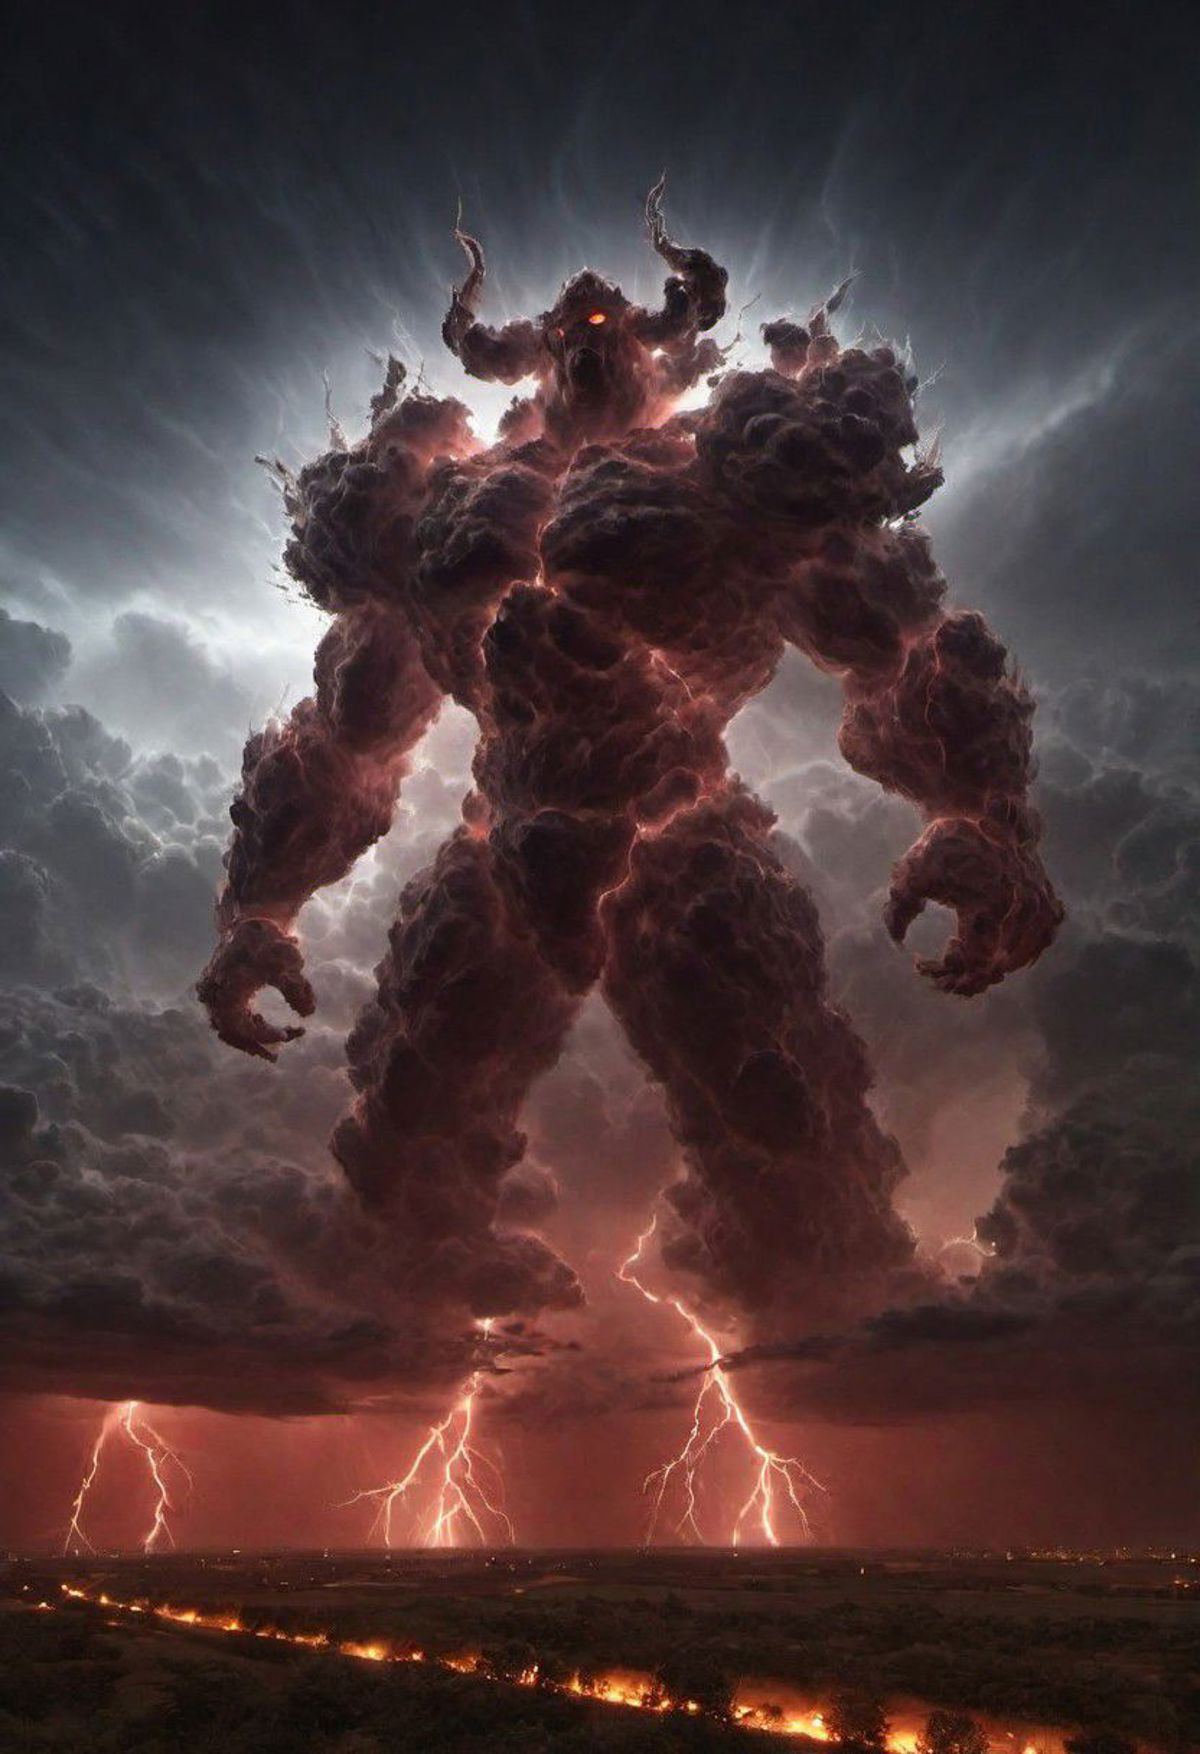 A Mighty Giant with Horns and Lightning Bolts for Arms Amidst a Stormy Sky